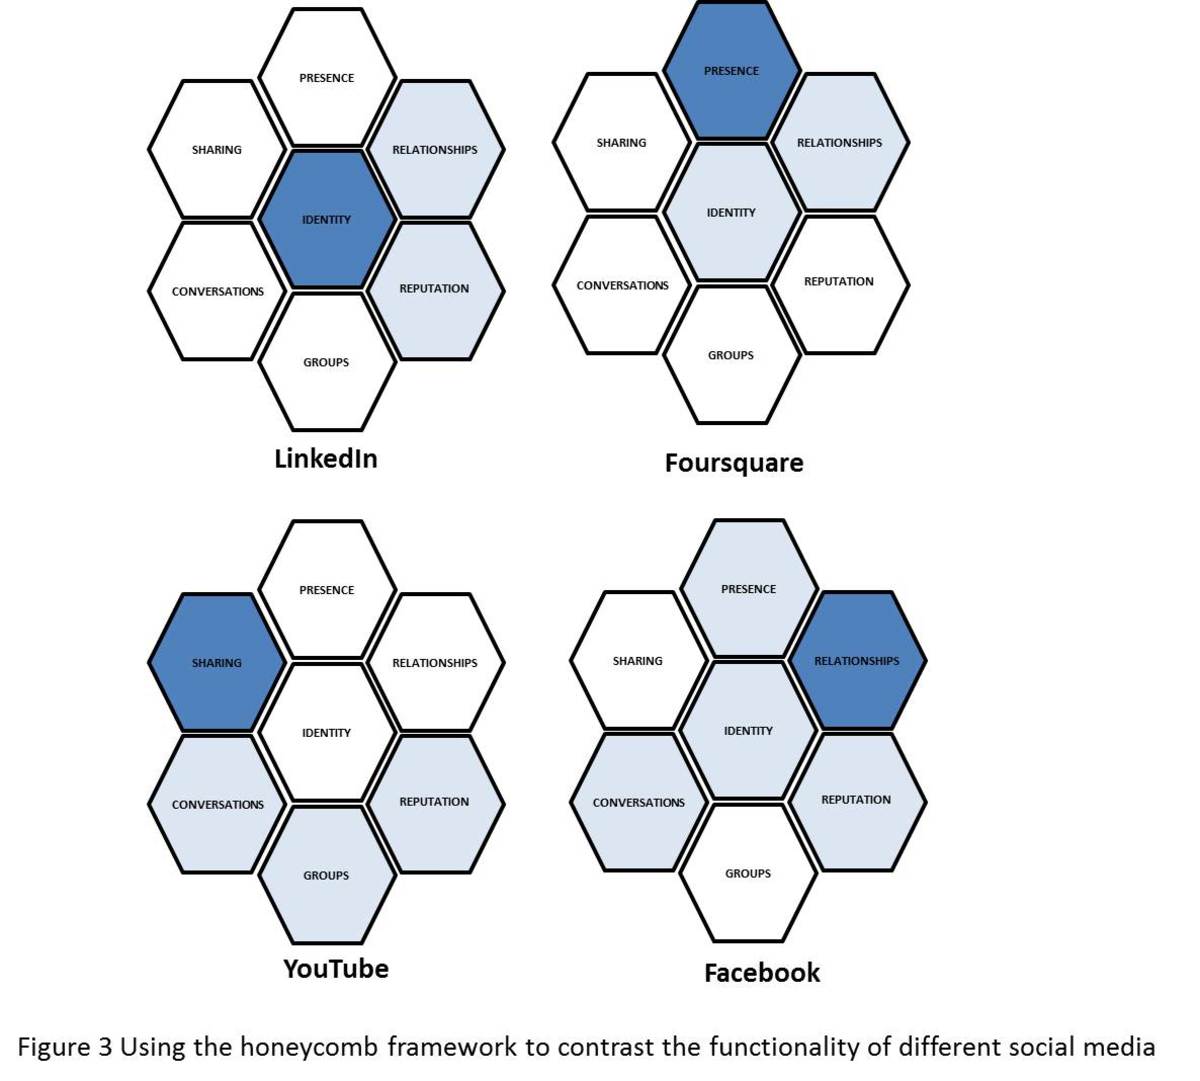 Using the honeycomb framework to contrast the functionality of different social media. Social media are defined as those interactive web platforms via which individuals and communities share, co-create, discuss, and modify user-generated content.